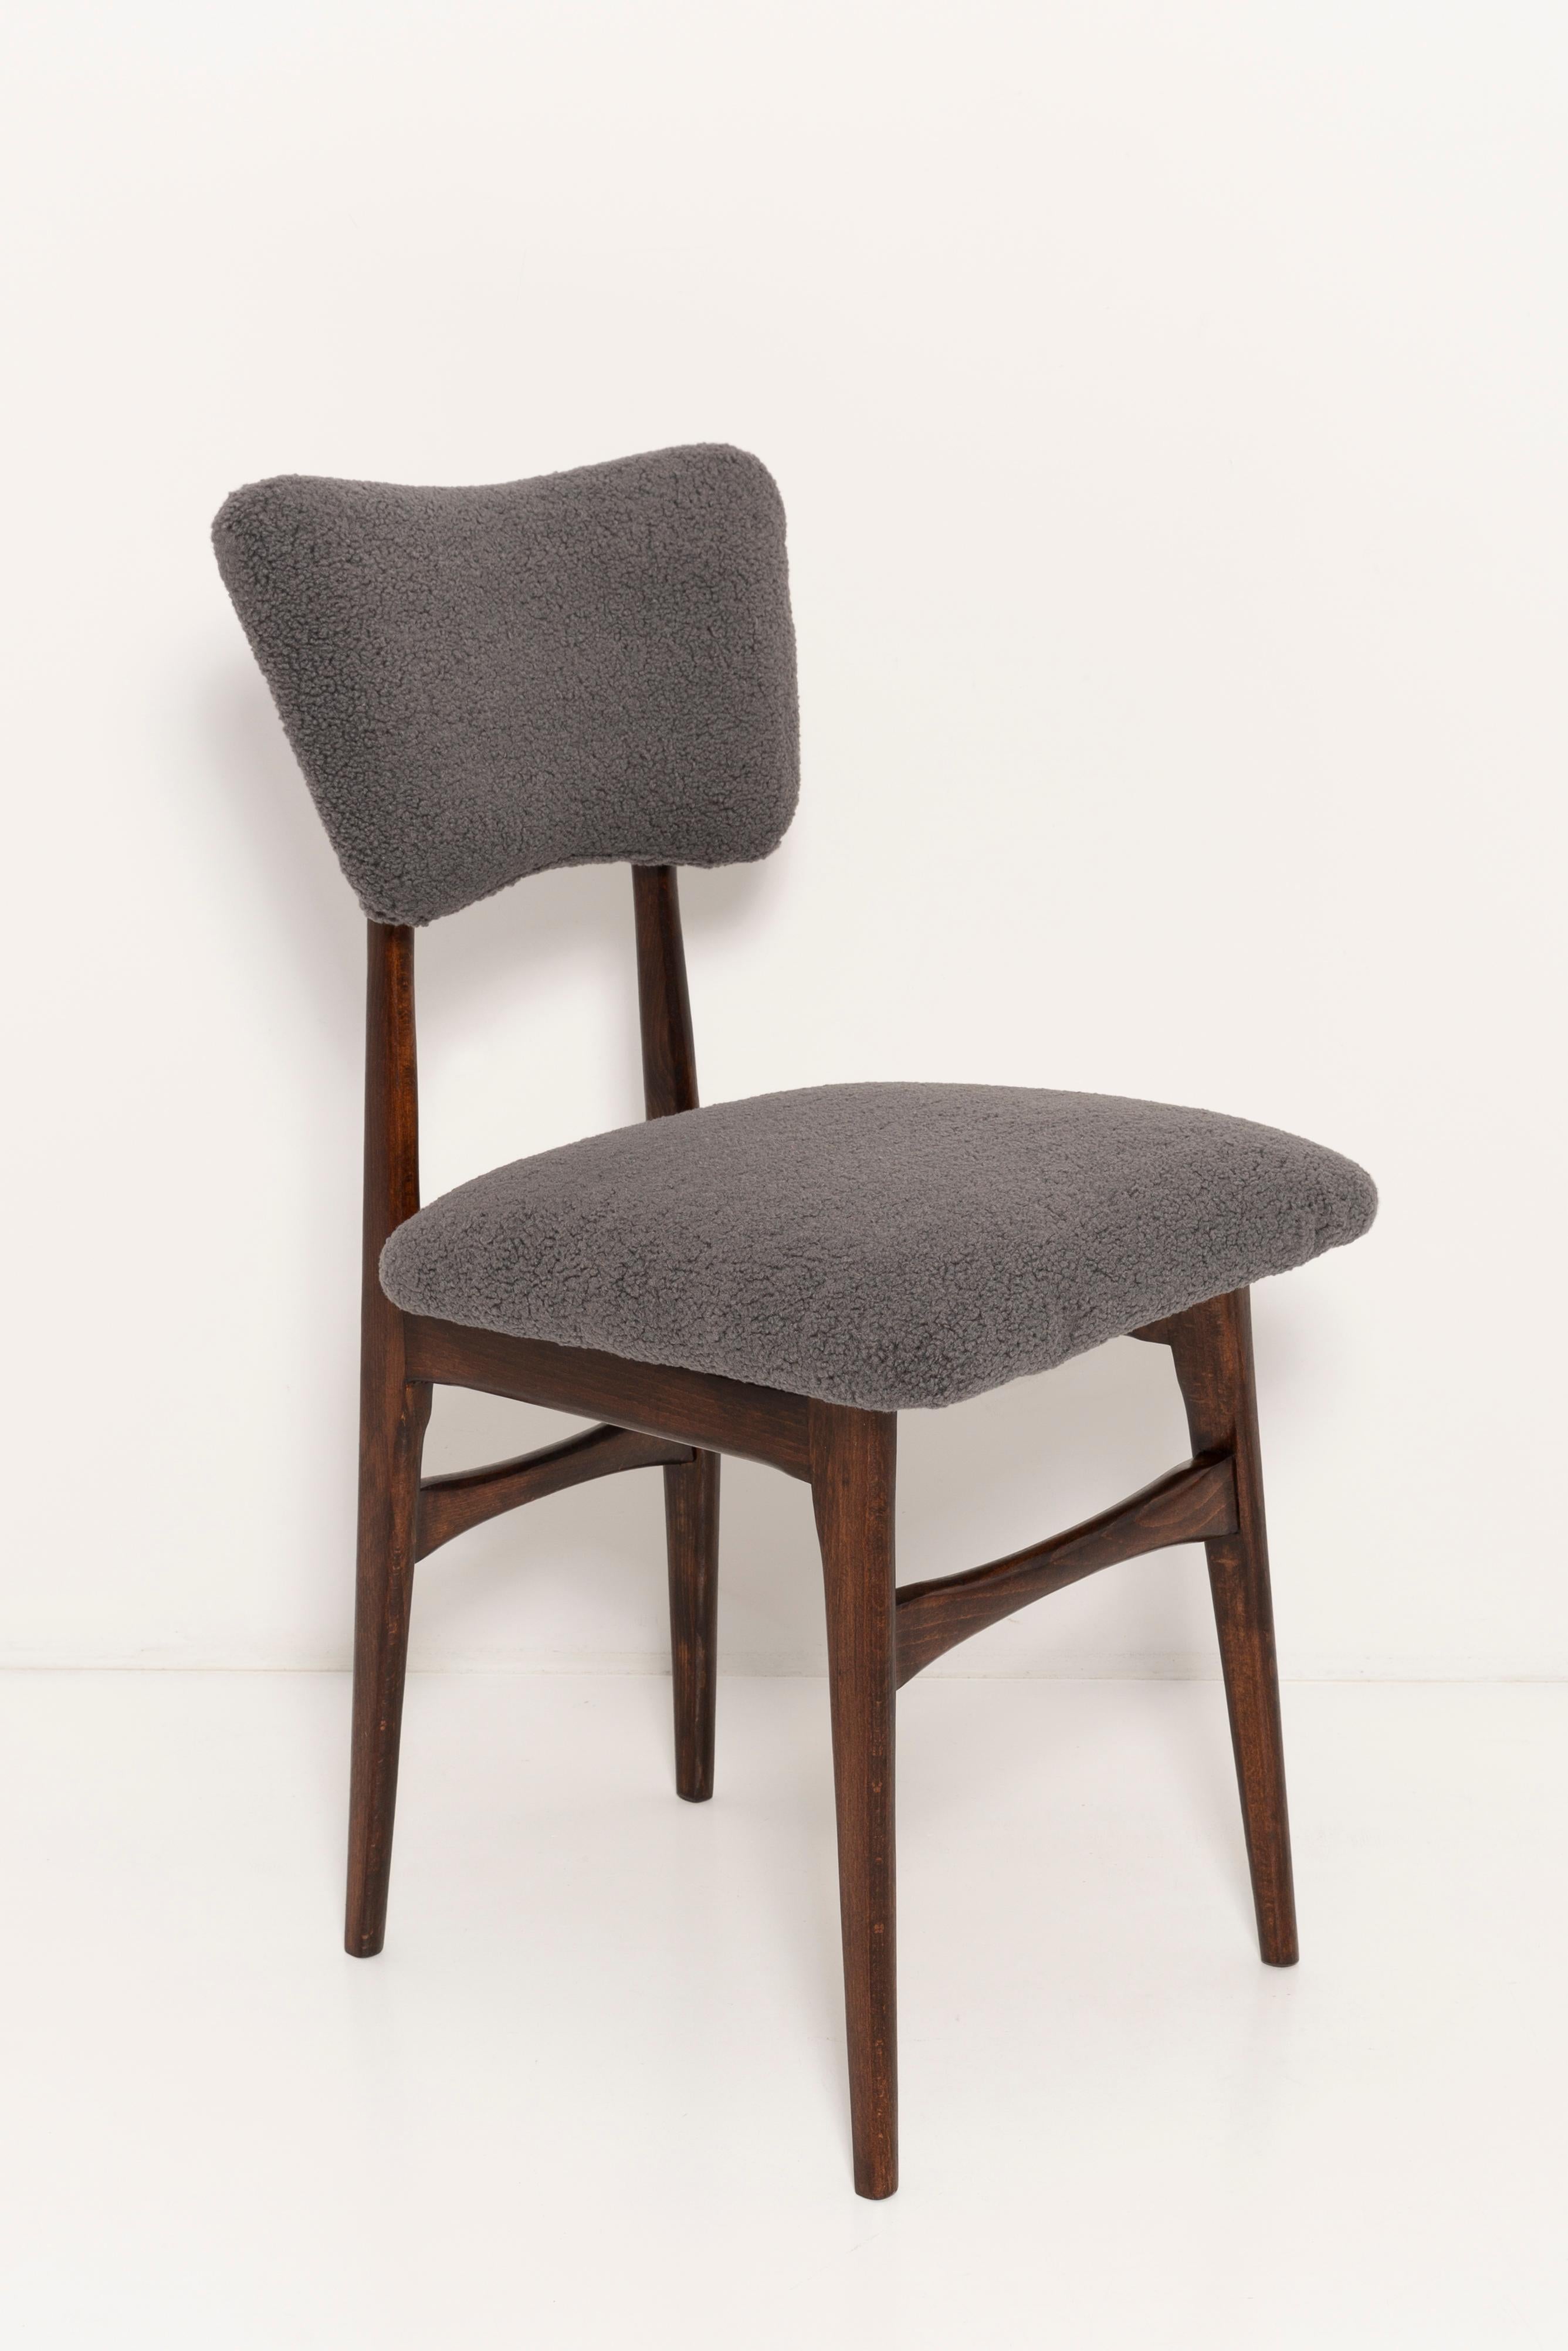 Chairs designed by Prof. Rajmund Halas. Made of beechwood. Chair is after a complete upholstery renovation, the woodwork has been refreshed. Seat and back is dressed in dark gray(color 07), durable and pleasant to the touch boucle fabric. Chair is